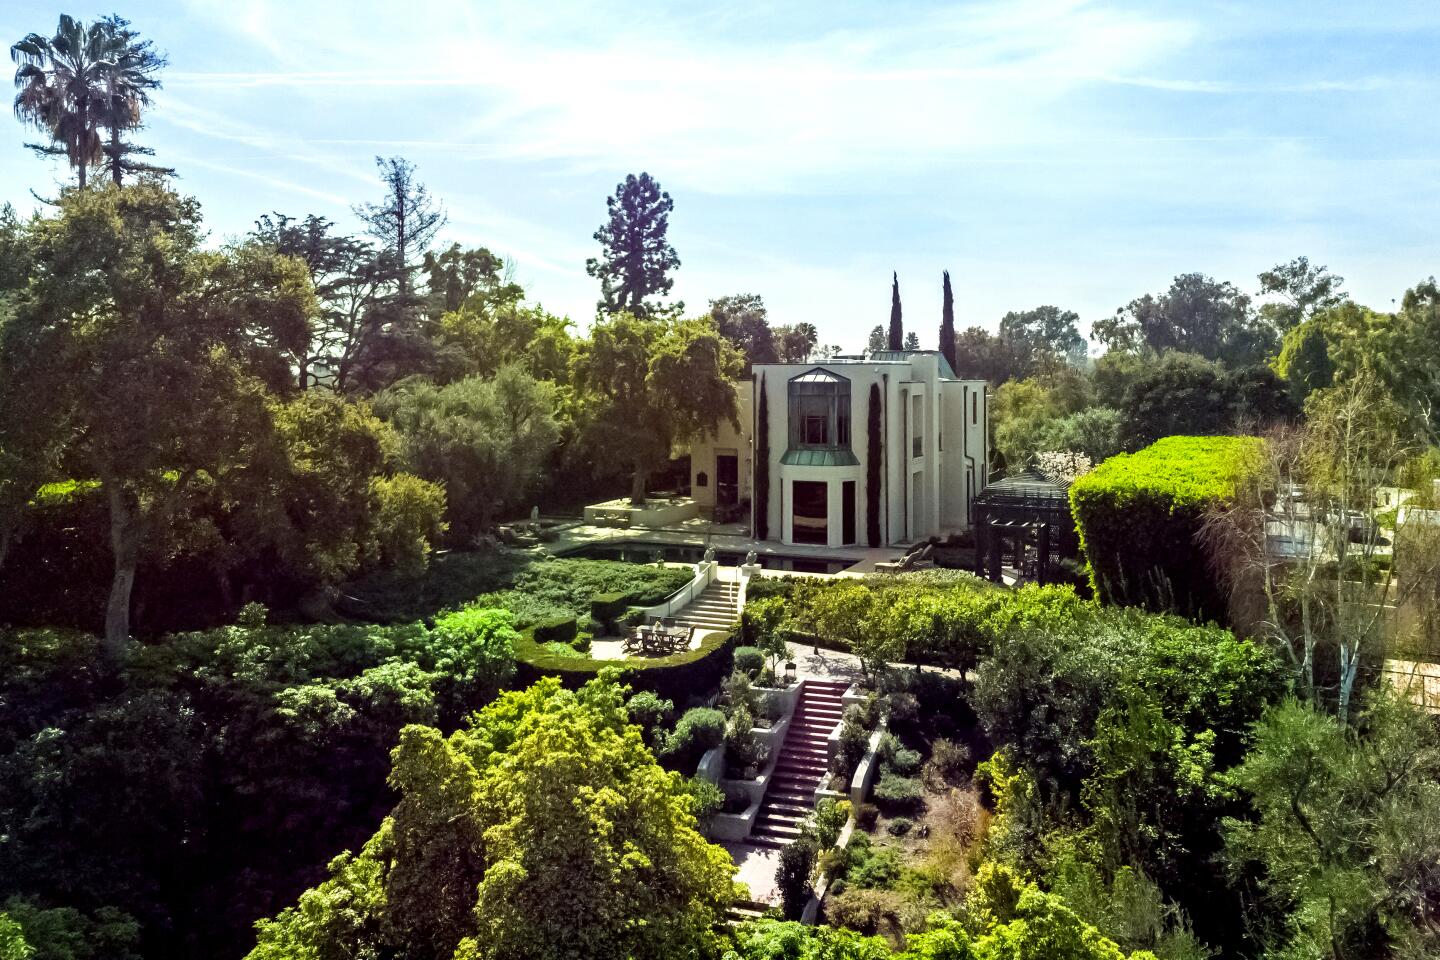 An aerial view of the home's exterior shows a swimming pool and steps leading down to formal gardens with lush trees